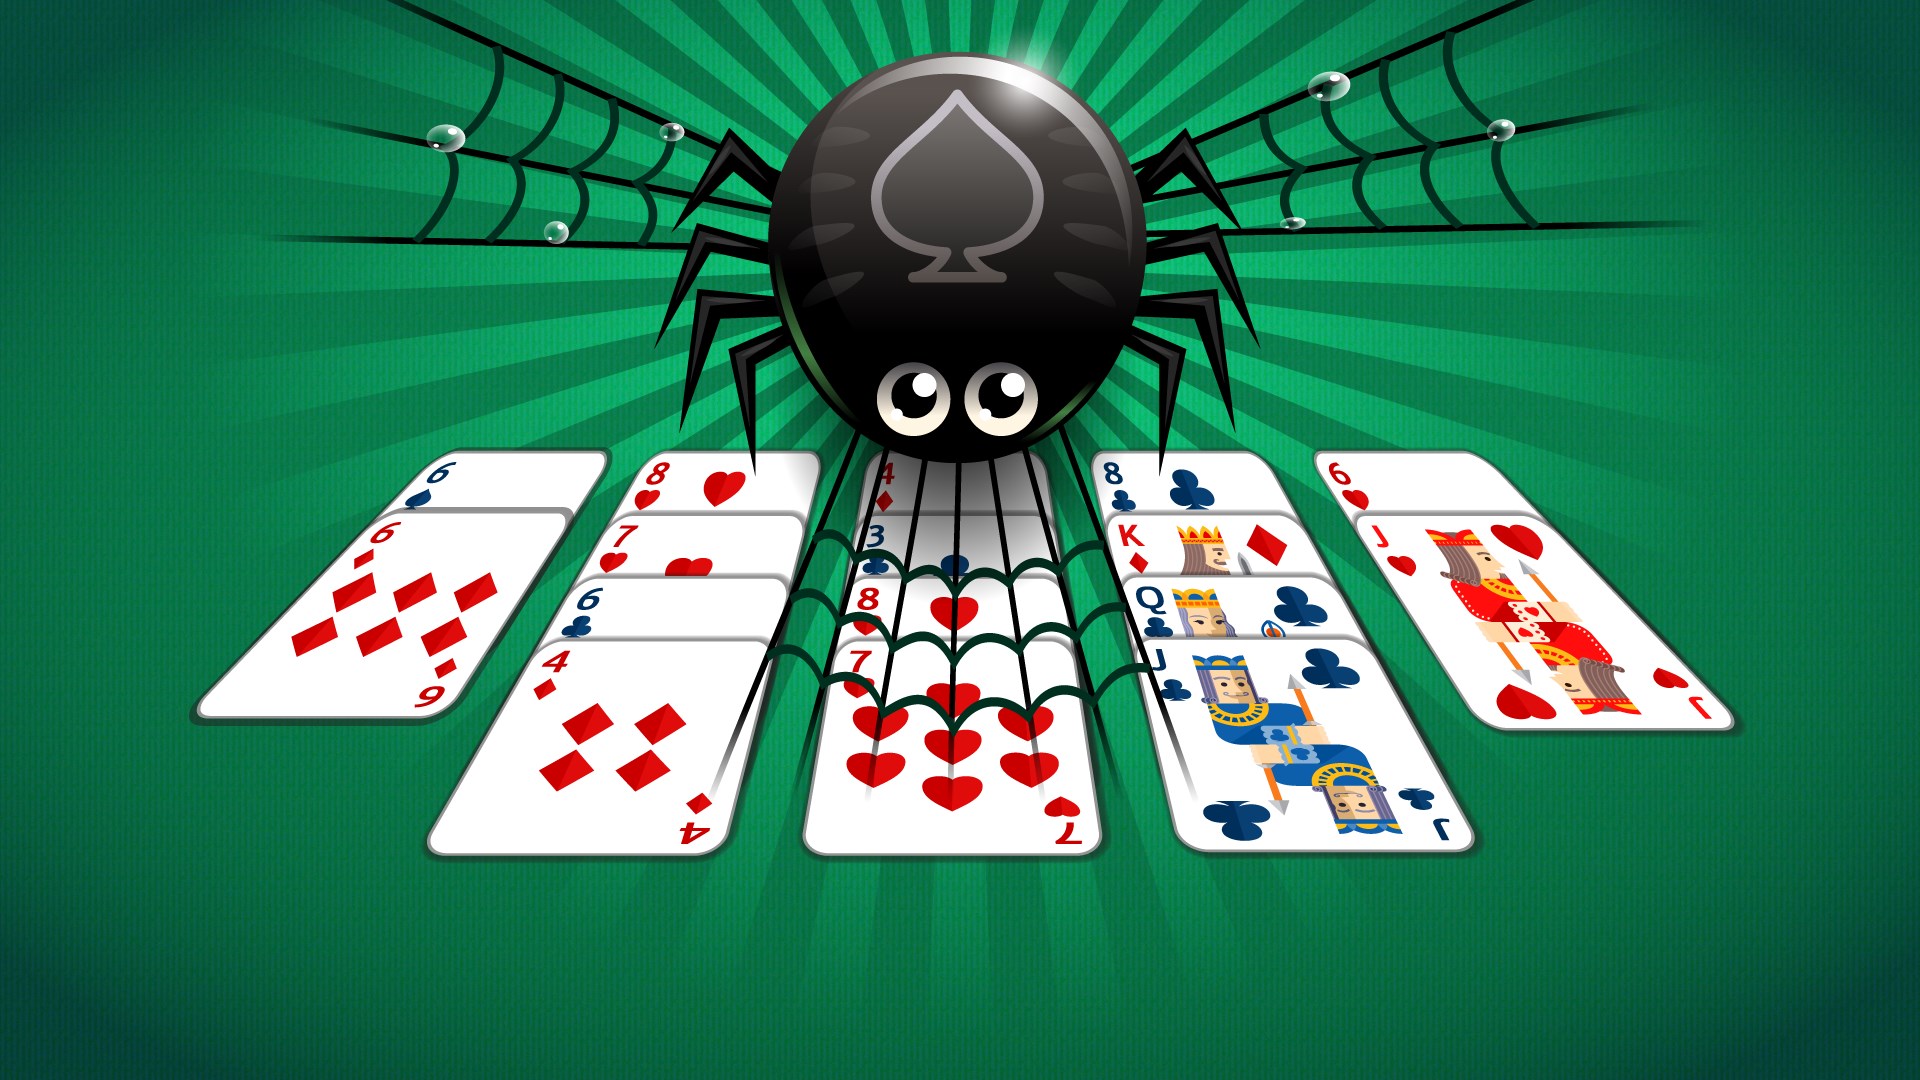 simple spider solitaire game free download